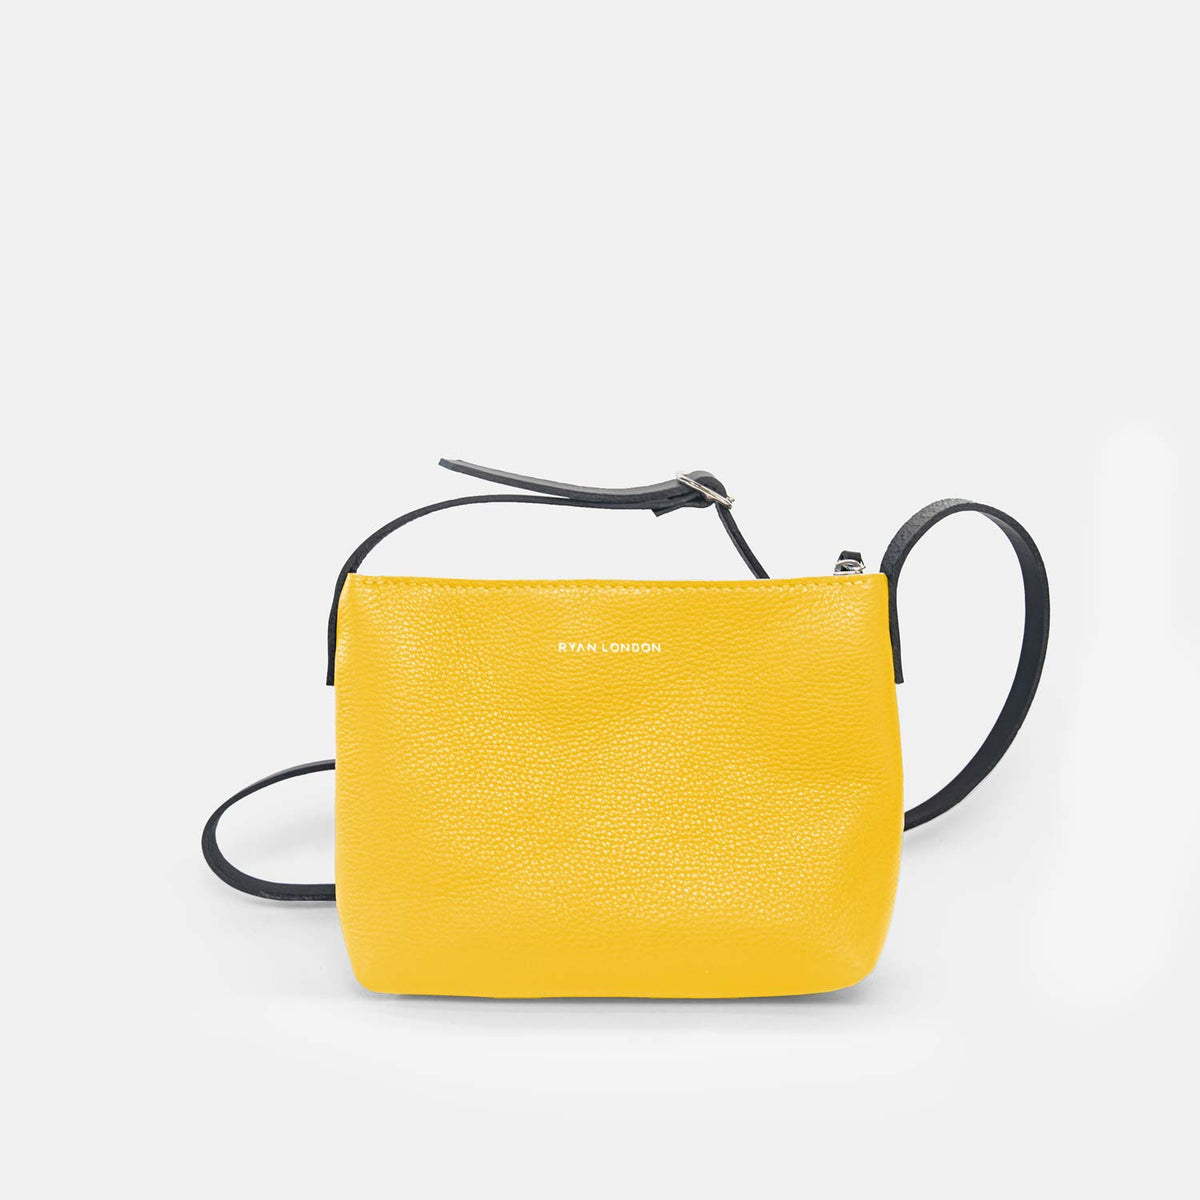 Italian Leather Crossbody Tote with Wool Felt and Zip - Yellow and Grey